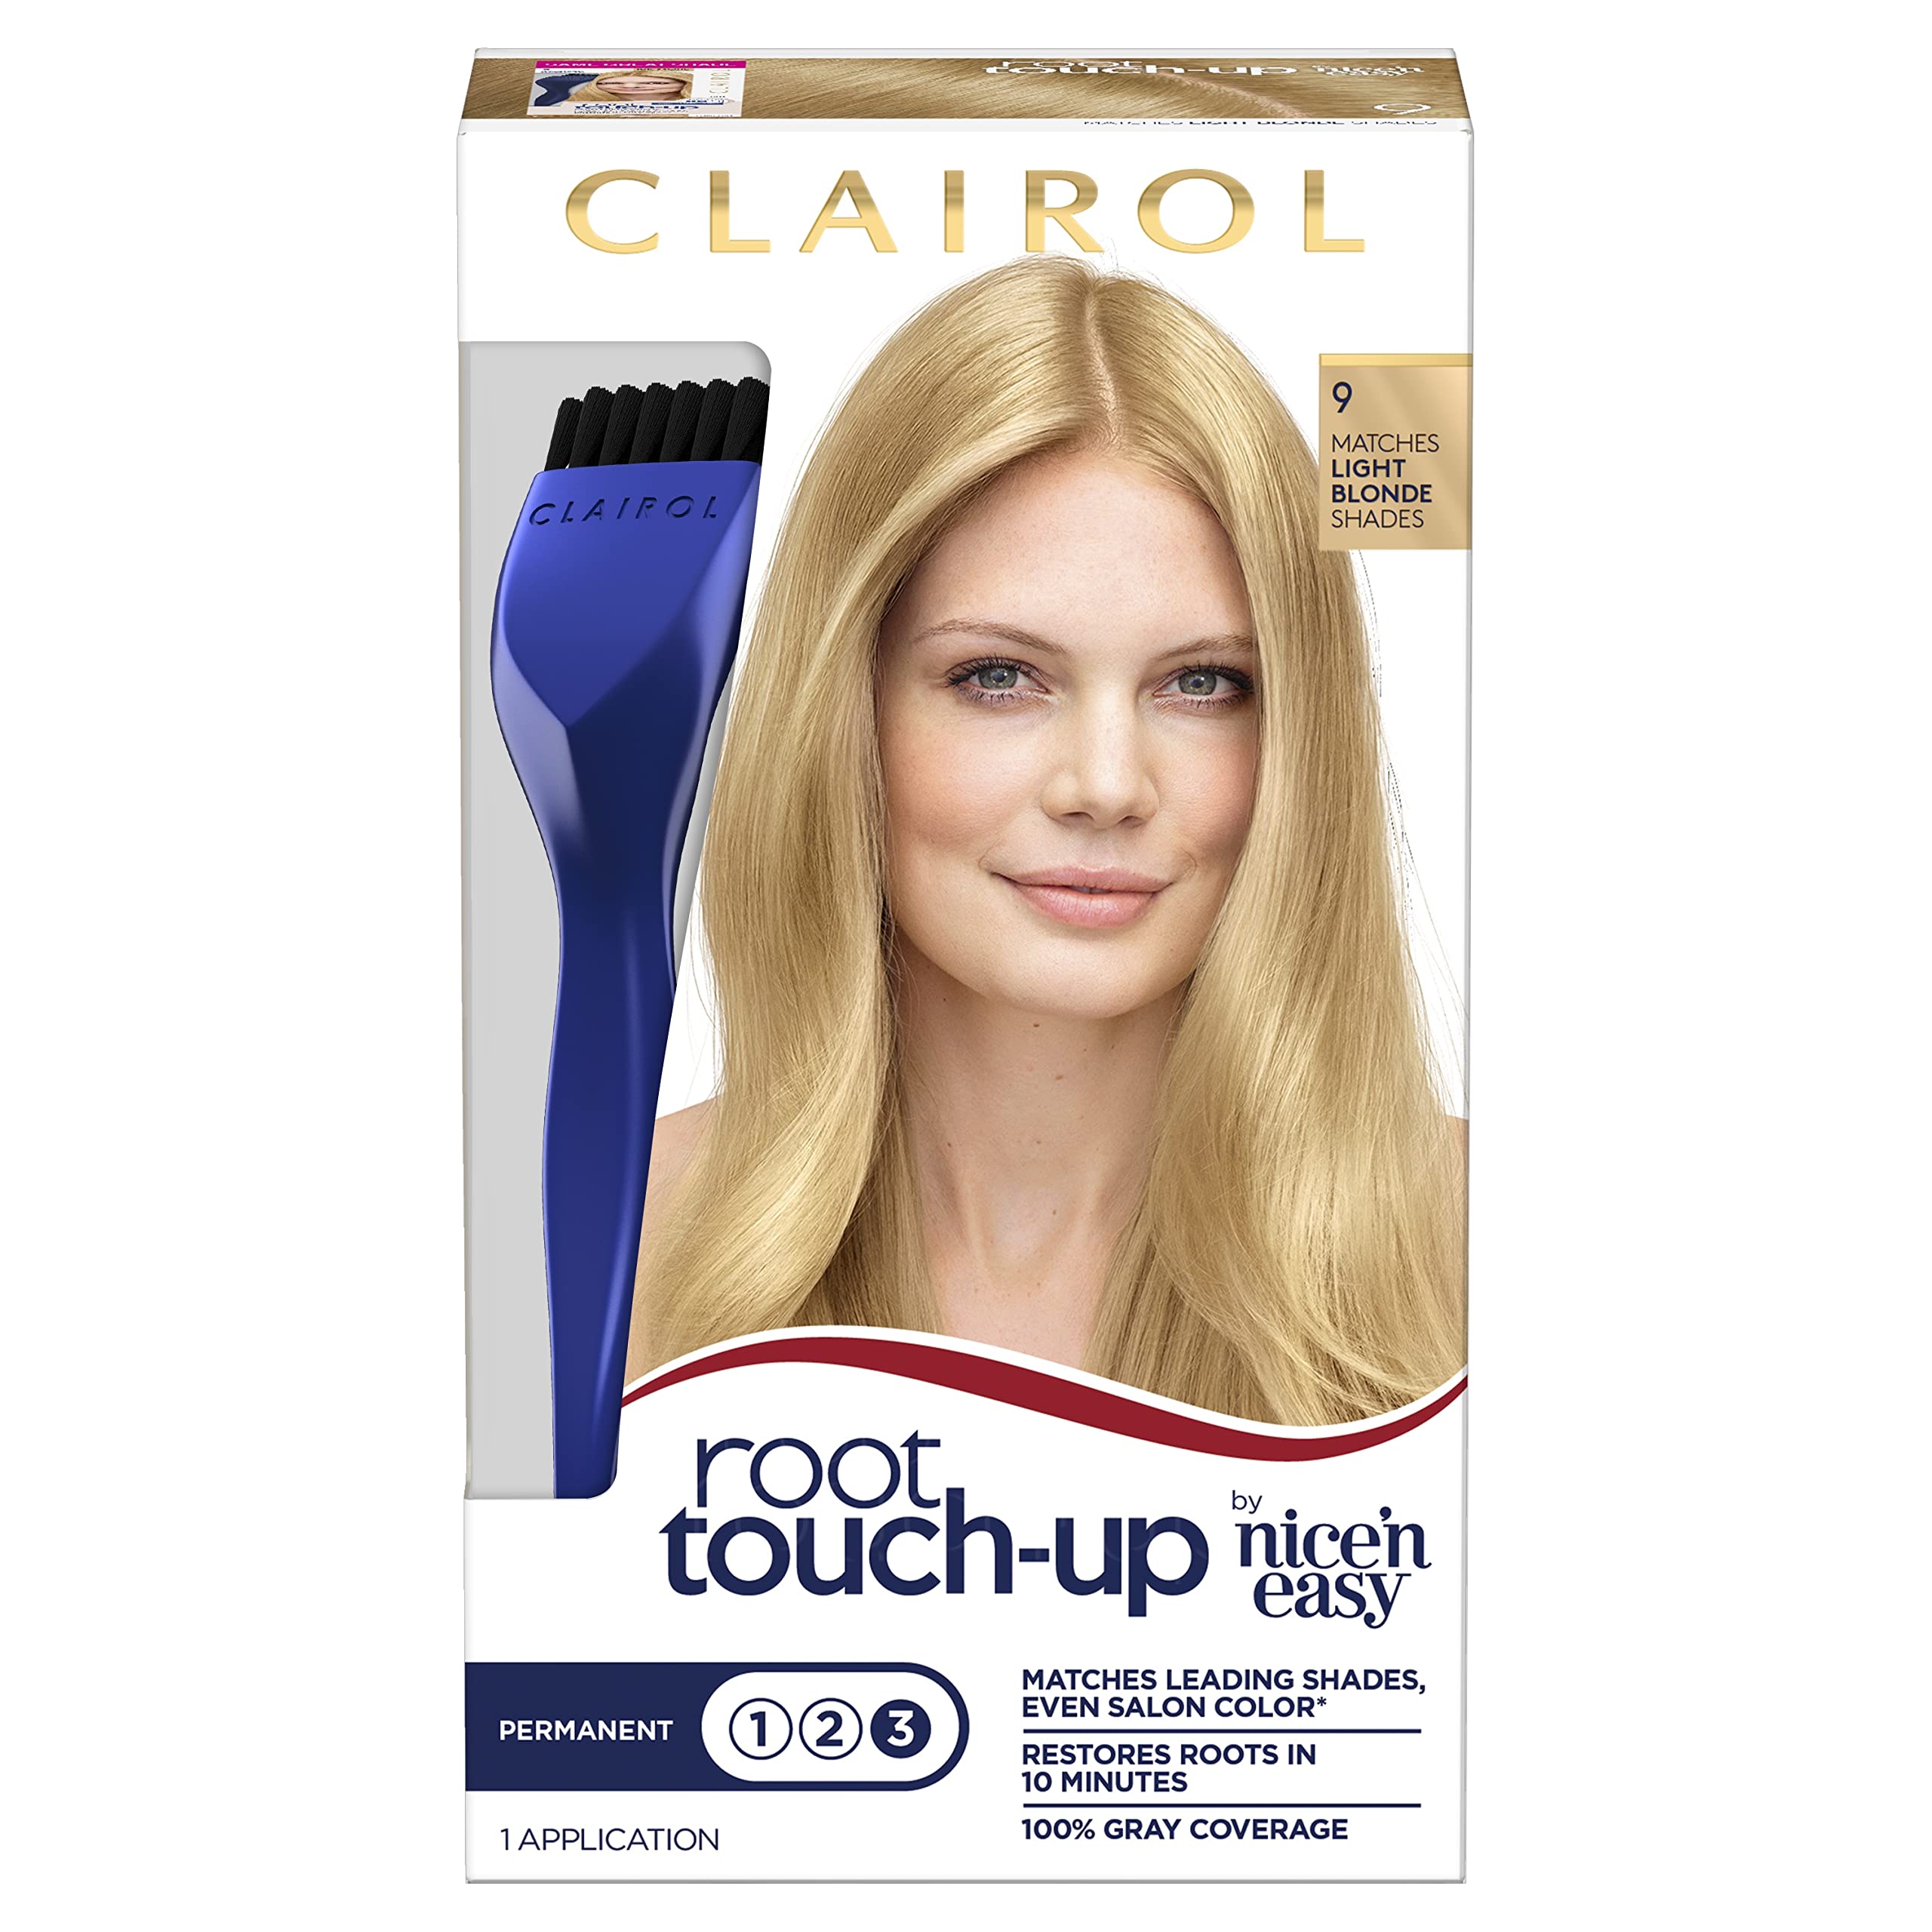 Clairol Root Touch-Up by Nice'n Easy Permanent Hair Dye, 9 Light Blonde Hair Color, 1 Count